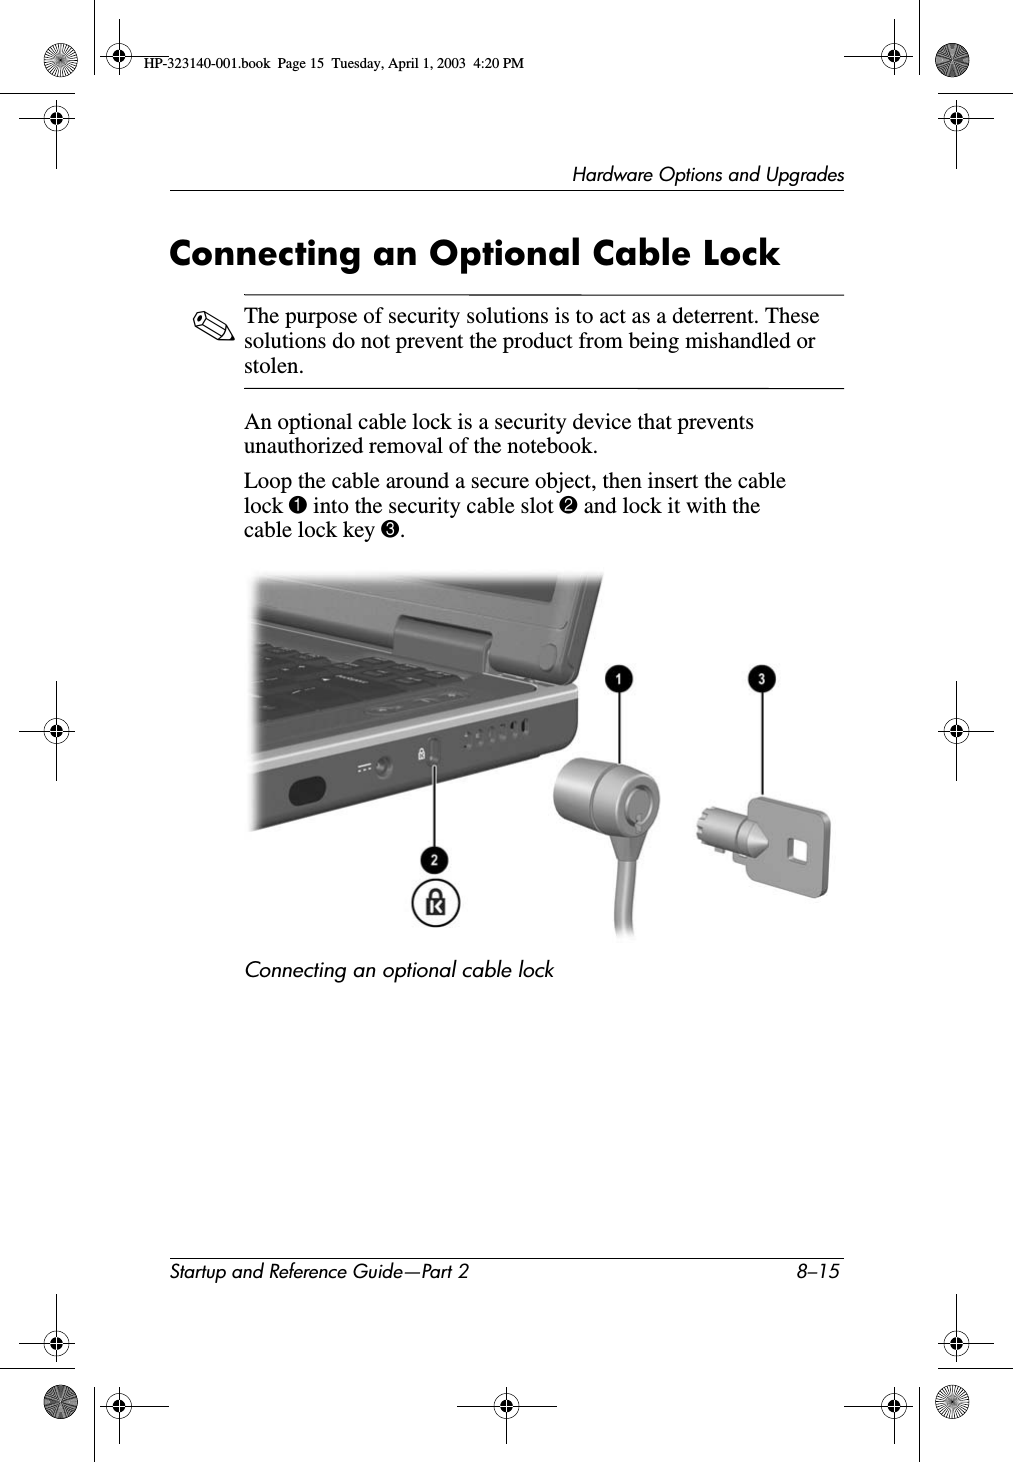 Hardware Options and UpgradesStartup and Reference Guide—Part 2 8–15Connecting an Optional Cable Lock✎The purpose of security solutions is to act as a deterrent. These solutions do not prevent the product from being mishandled or stolen.An optional cable lock is a security device that prevents unauthorized removal of the notebook.Loop the cable around a secure object, then insert the cable lock 1 into the security cable slot 2 and lock it with the cable lock key 3.Connecting an optional cable lockHP-323140-001.book  Page 15  Tuesday, April 1, 2003  4:20 PM